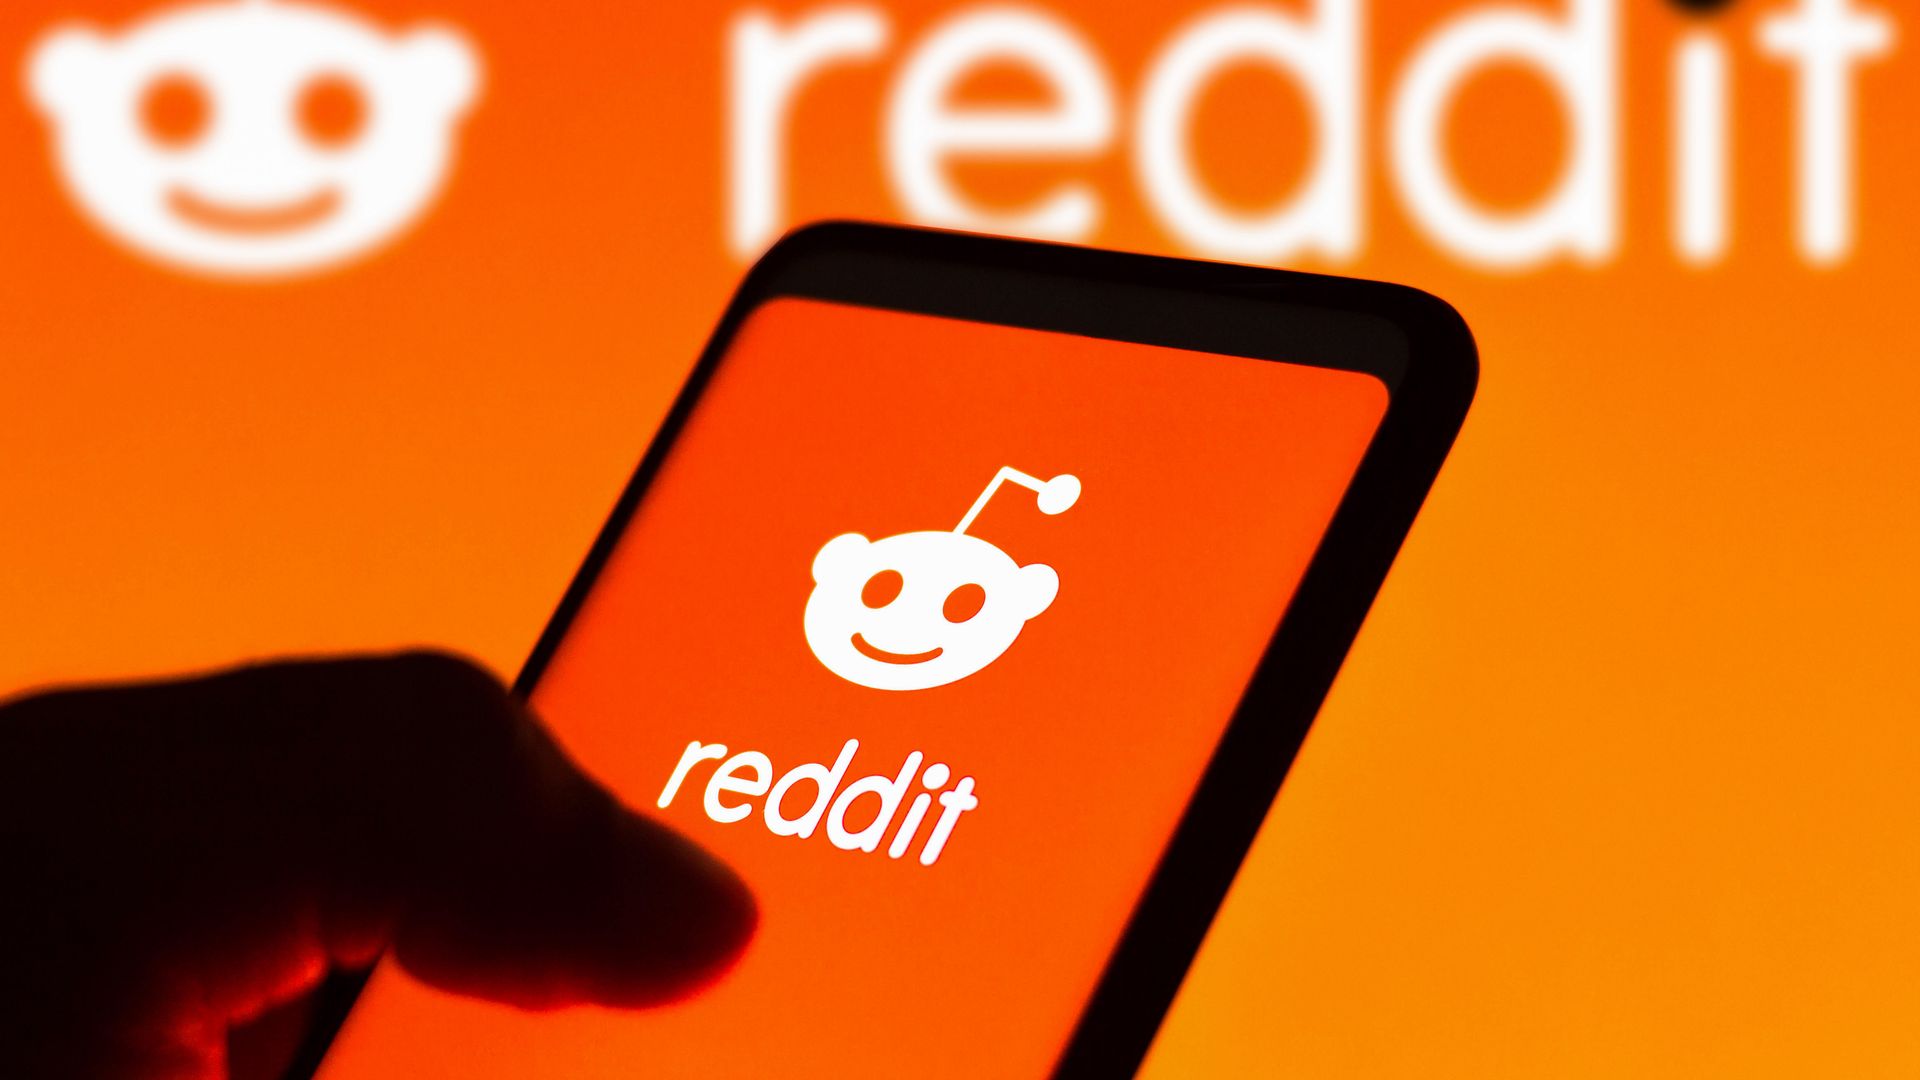 A person holding a smartphone with a Reddit logo on it.